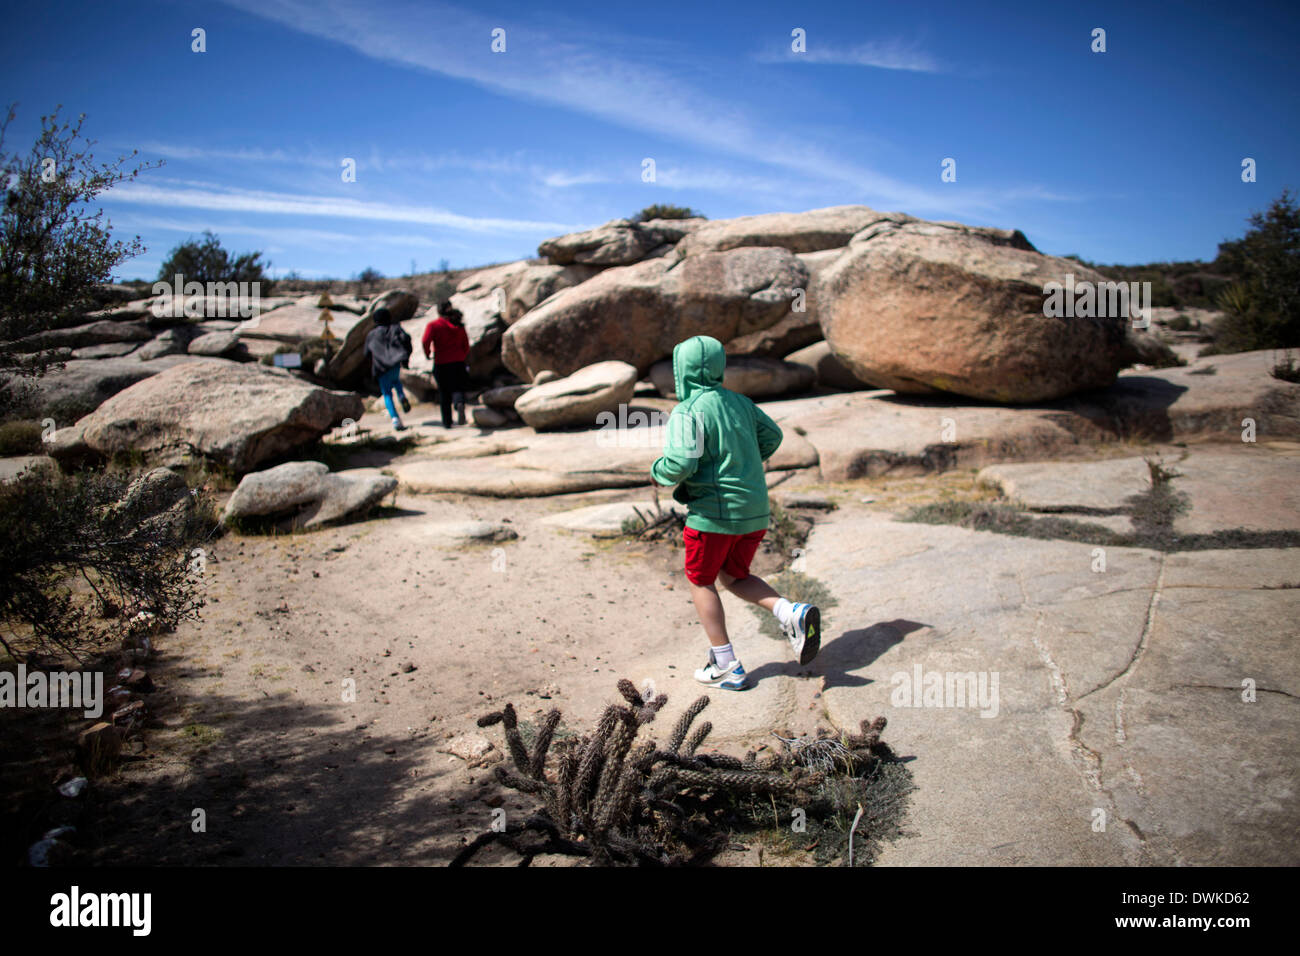 (140311) -- BAJA CALIFORNIA, March 11, 2014 (Xinhua) -- Image taken on March 9, 2014 shows tourists visiting the archaelogical site of 'El Vallecito' near La Rumorosa town Baja California, northwest of Mexico. According to the National Institute of Antropology and History (INAH, its acronym in Spanish), El Vallecito was occupied by members of the Yuman linguistic family, which originally lived in the northwest area of the state of Baja California and southern California. At the site there are rock paintings of simple lines traced with mineral dyes in white, red, black and yellow. (Xinhua/Guill Stock Photo